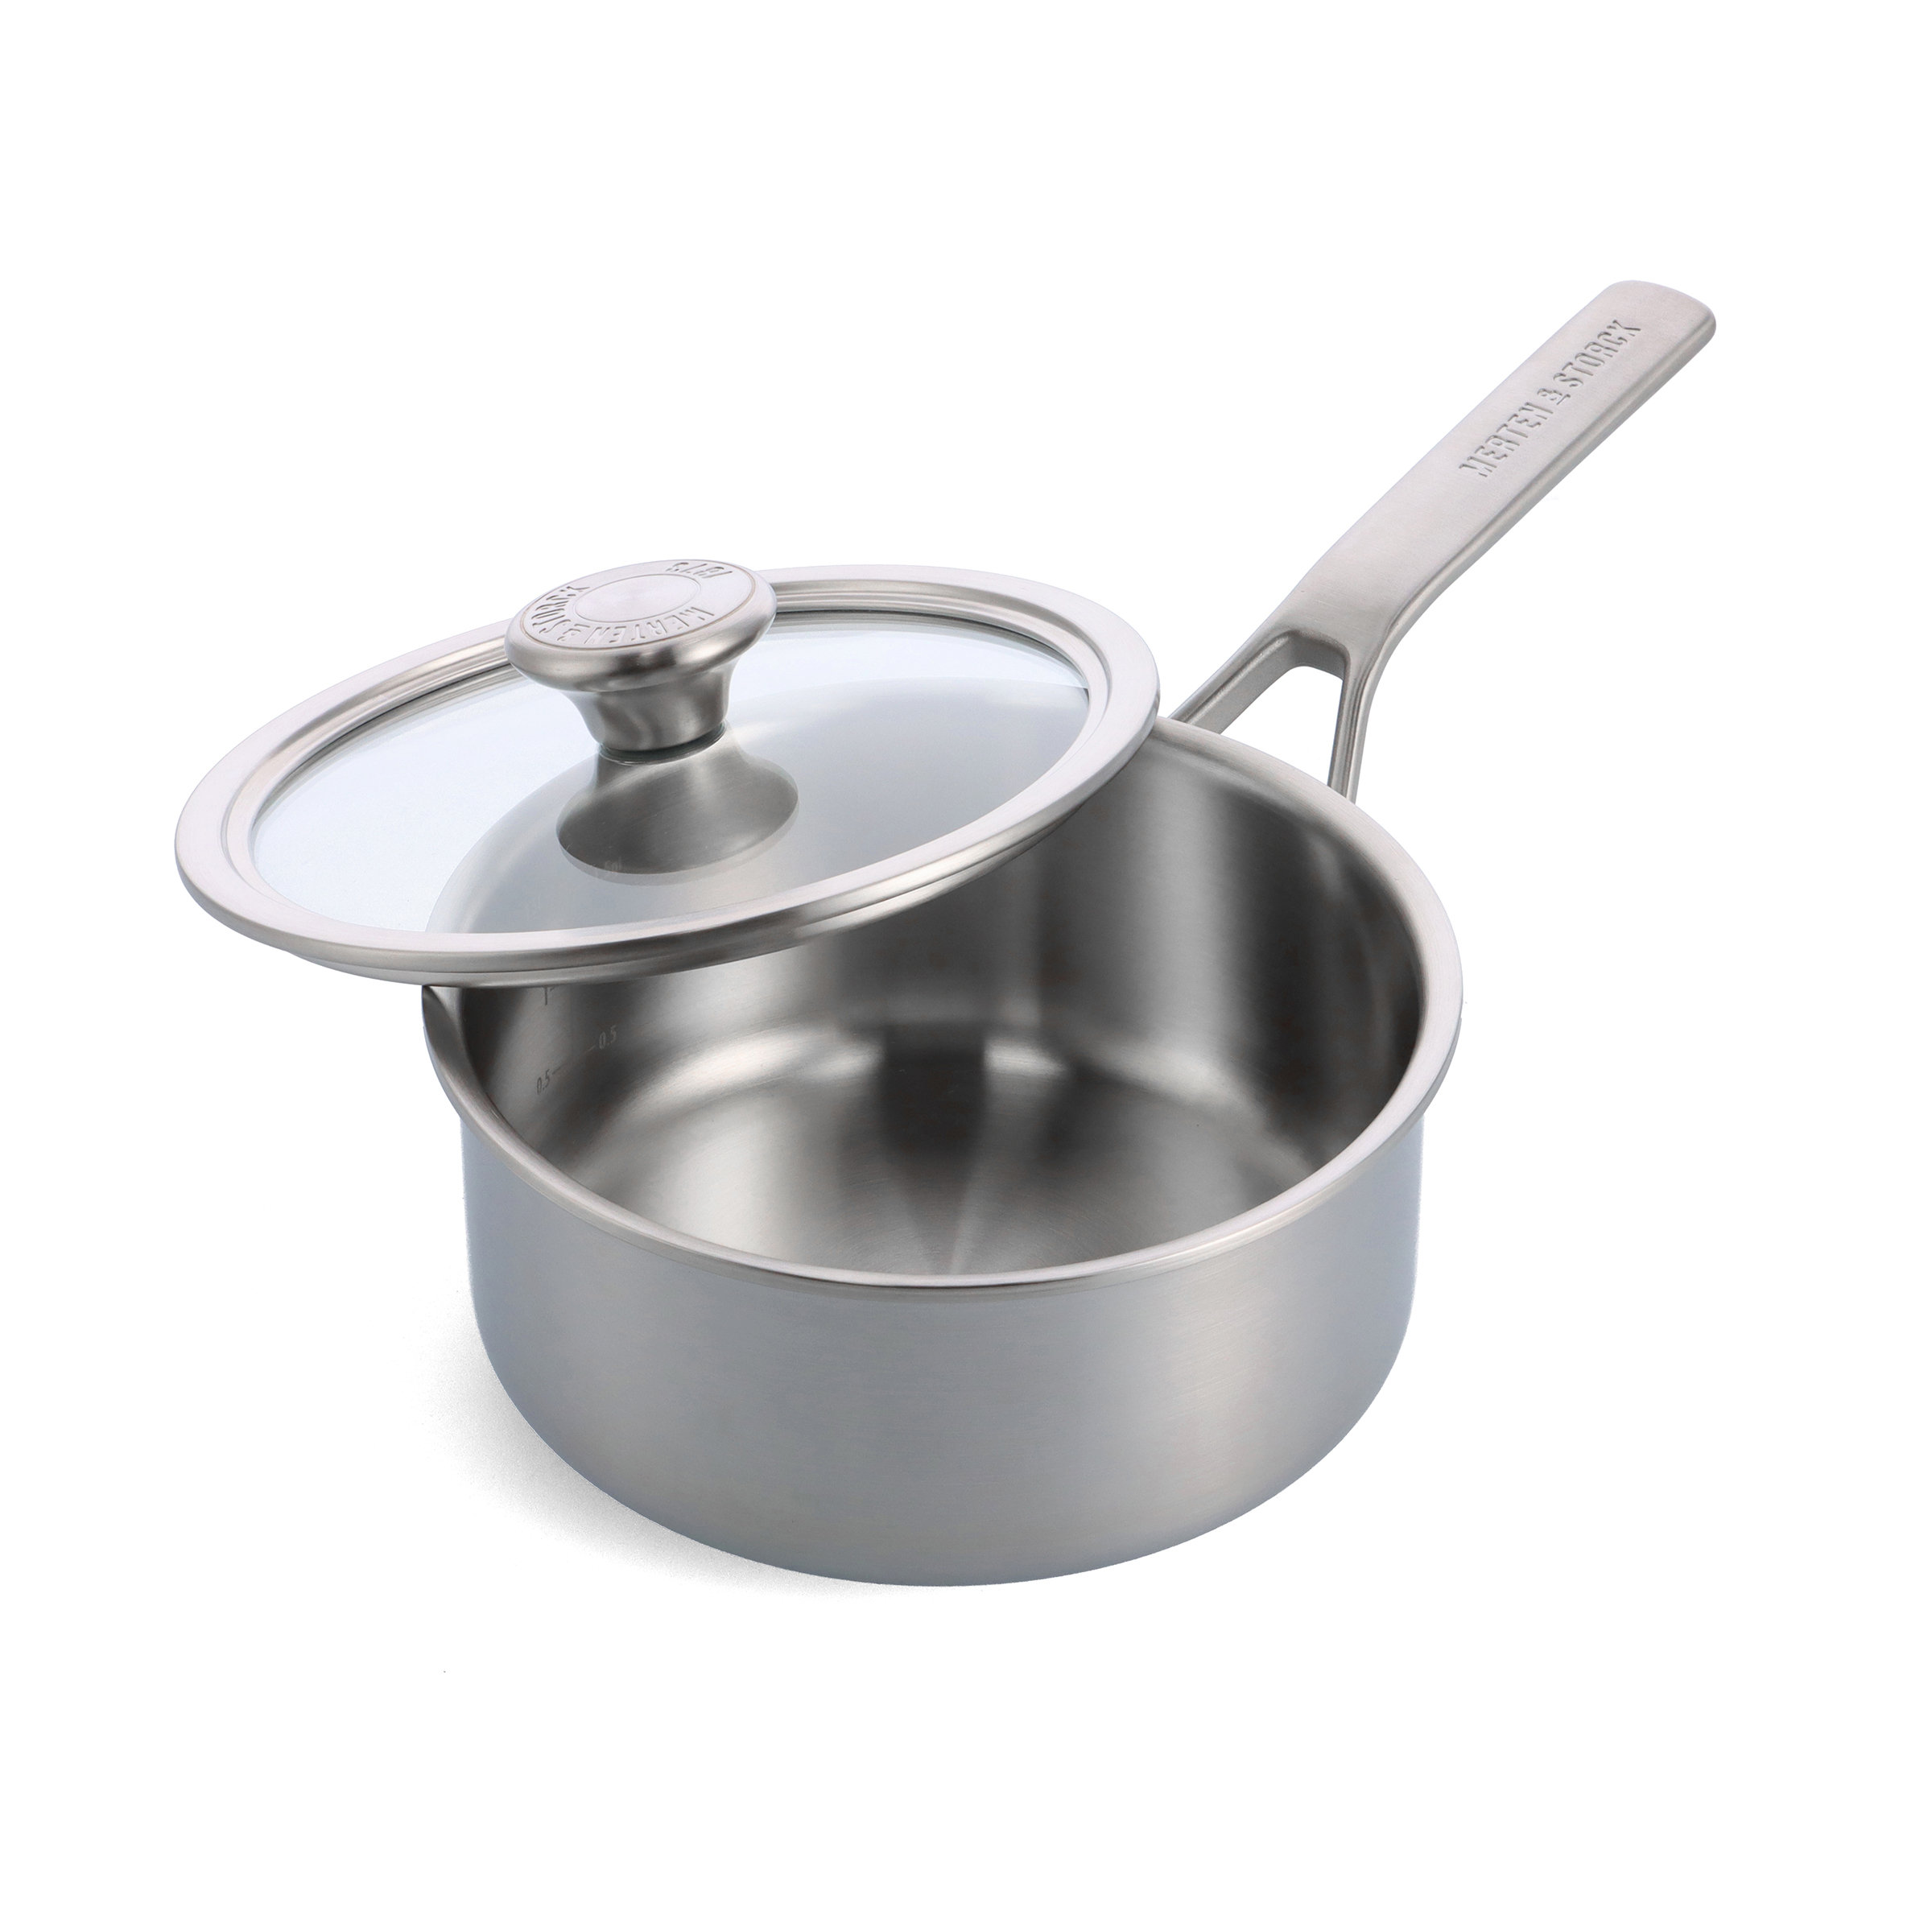 Merten & Storck Tri-Ply Stainless Steel Induction 8 Frying Pan Skillet, Multi Clad, Oven Safe, Silver